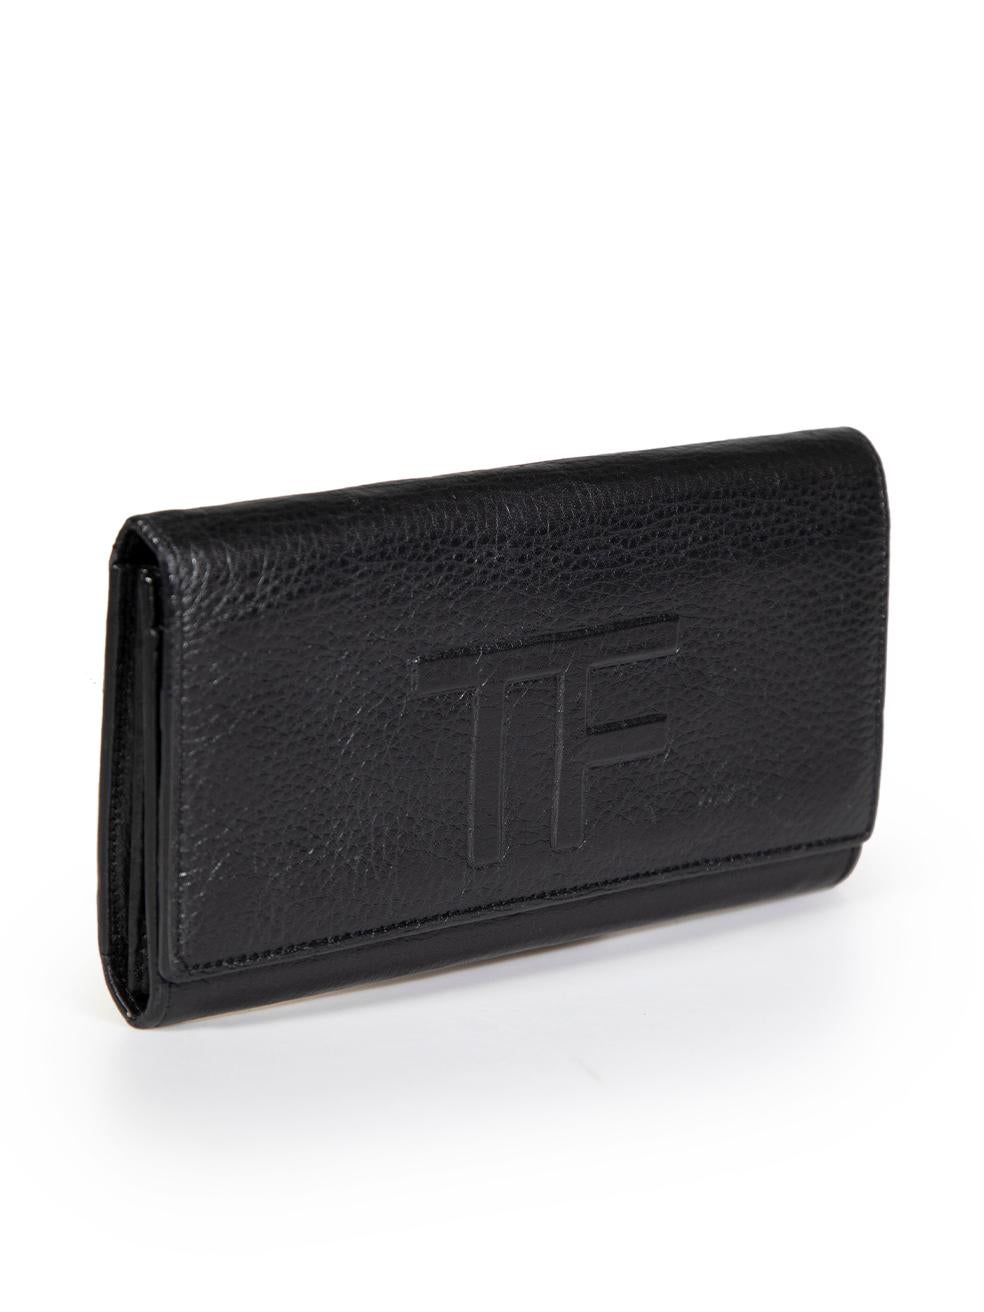 CONDITION is Very good. Minimal wear to wallet is evident. Two small indentations to leather embossed front and inside front on this used Tom Ford designer resale item.
 
 
 
 Details
 
 
 Black
 
 Leather
 
 Wallet
 
 Embossed logo detail
 
 Flap